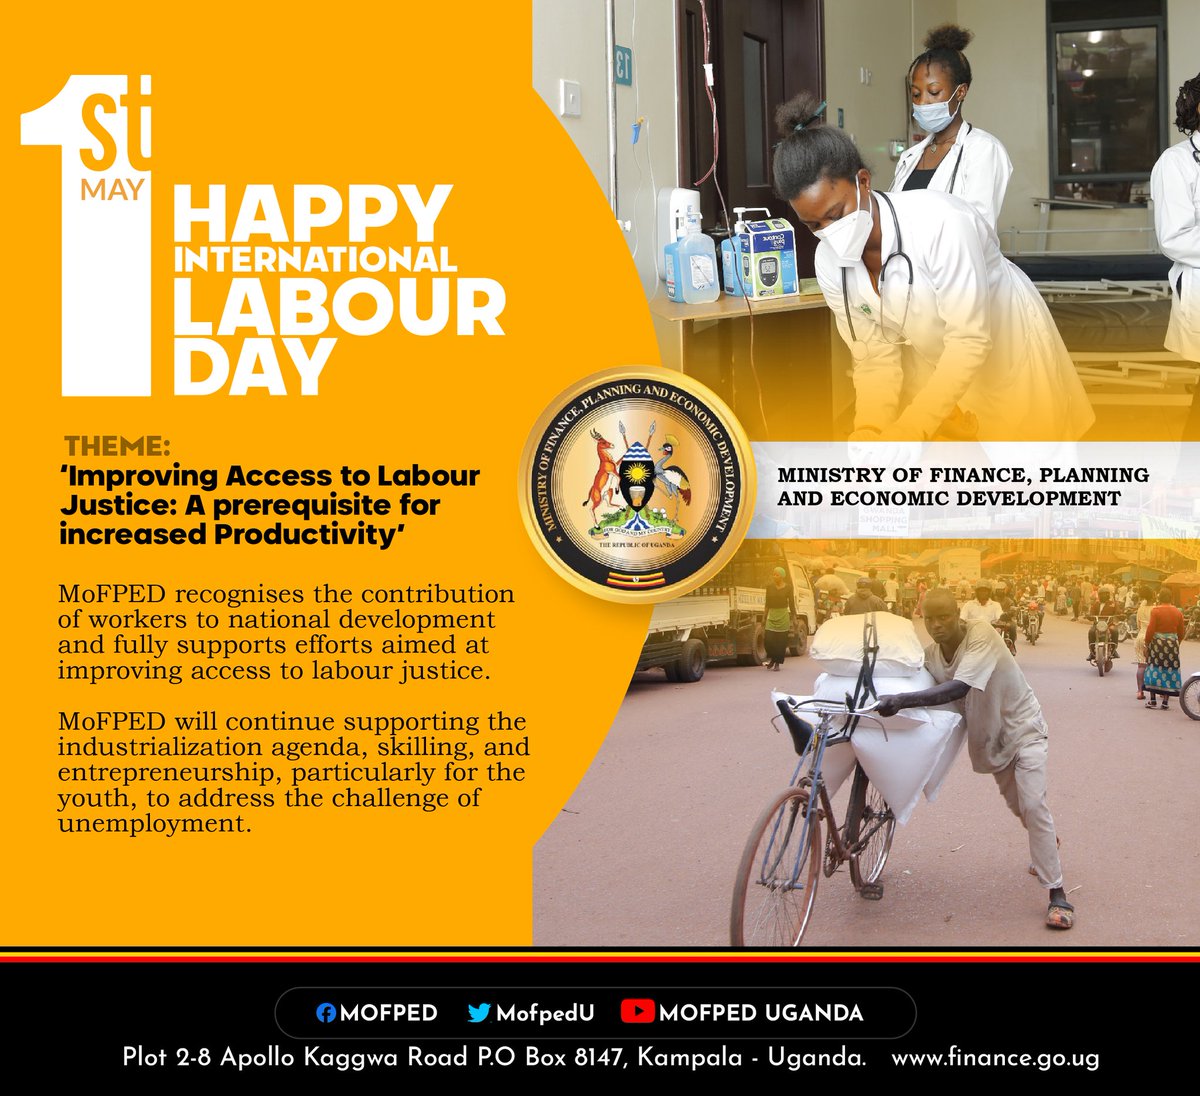 We join you all in celebrating the workers and recognising their contribution to the development of our country. #HappyLabourDay #DoingMore